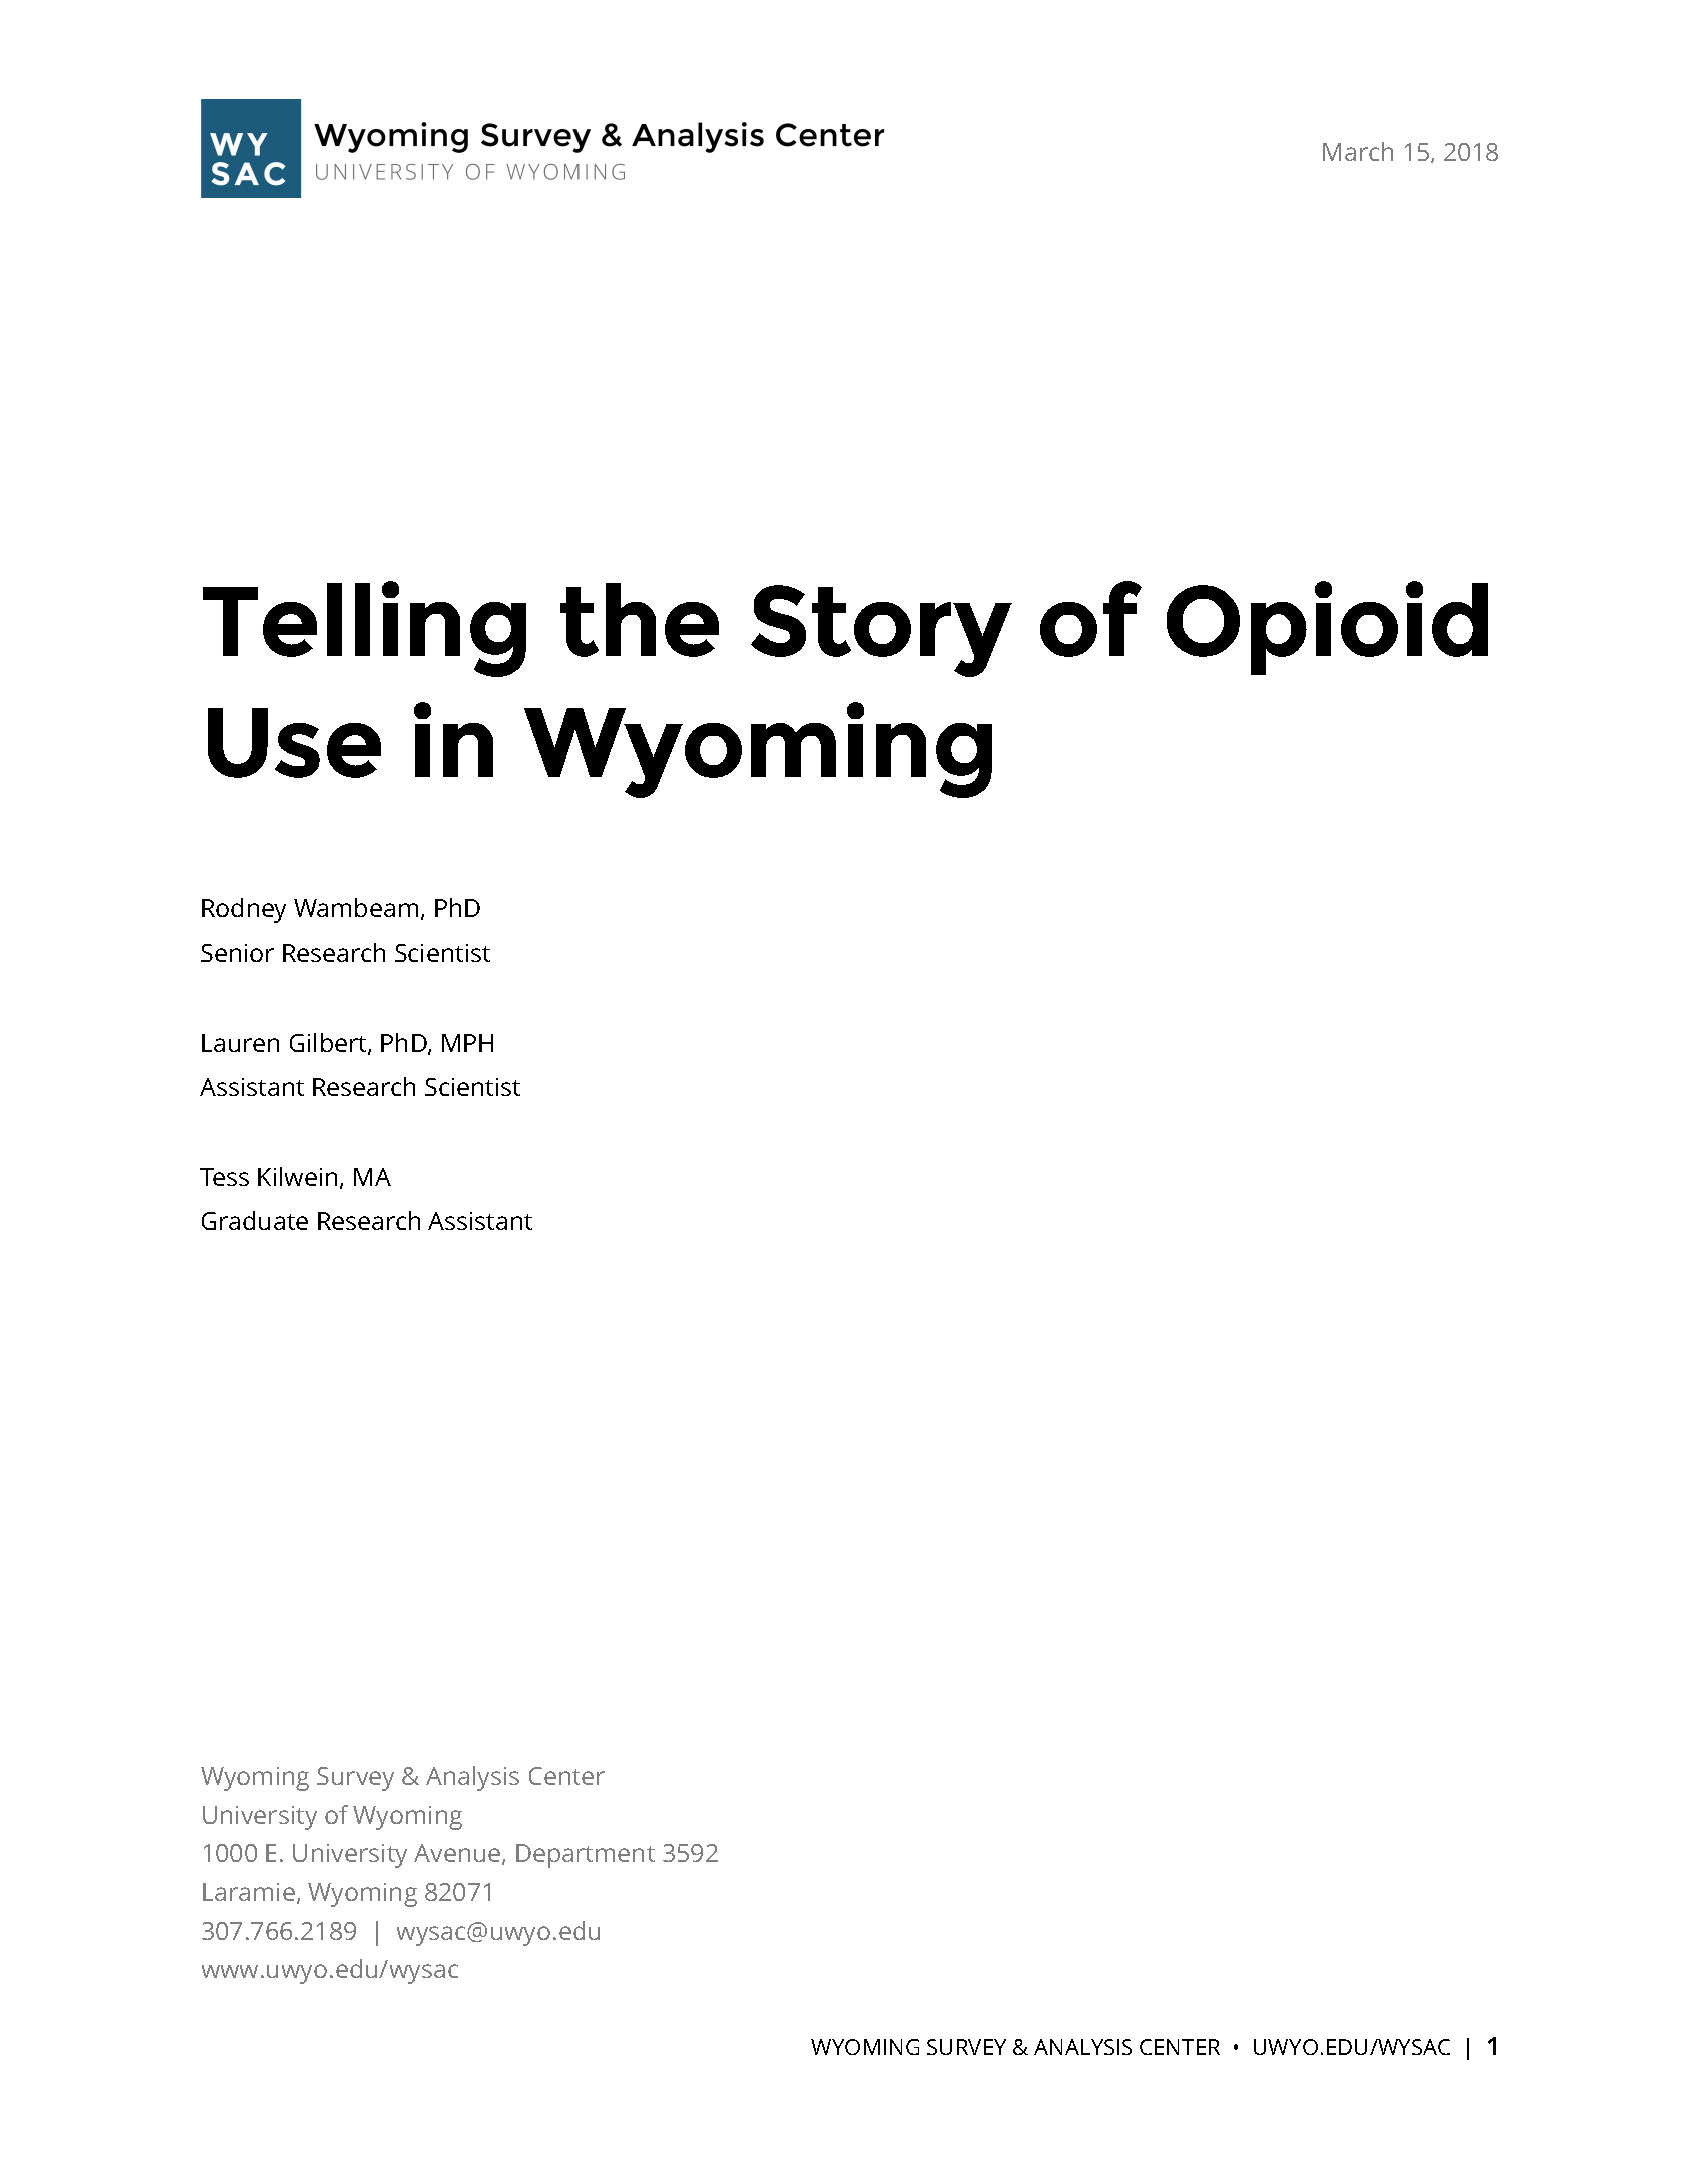 Telling the Story of Opioid Use in Wyoming